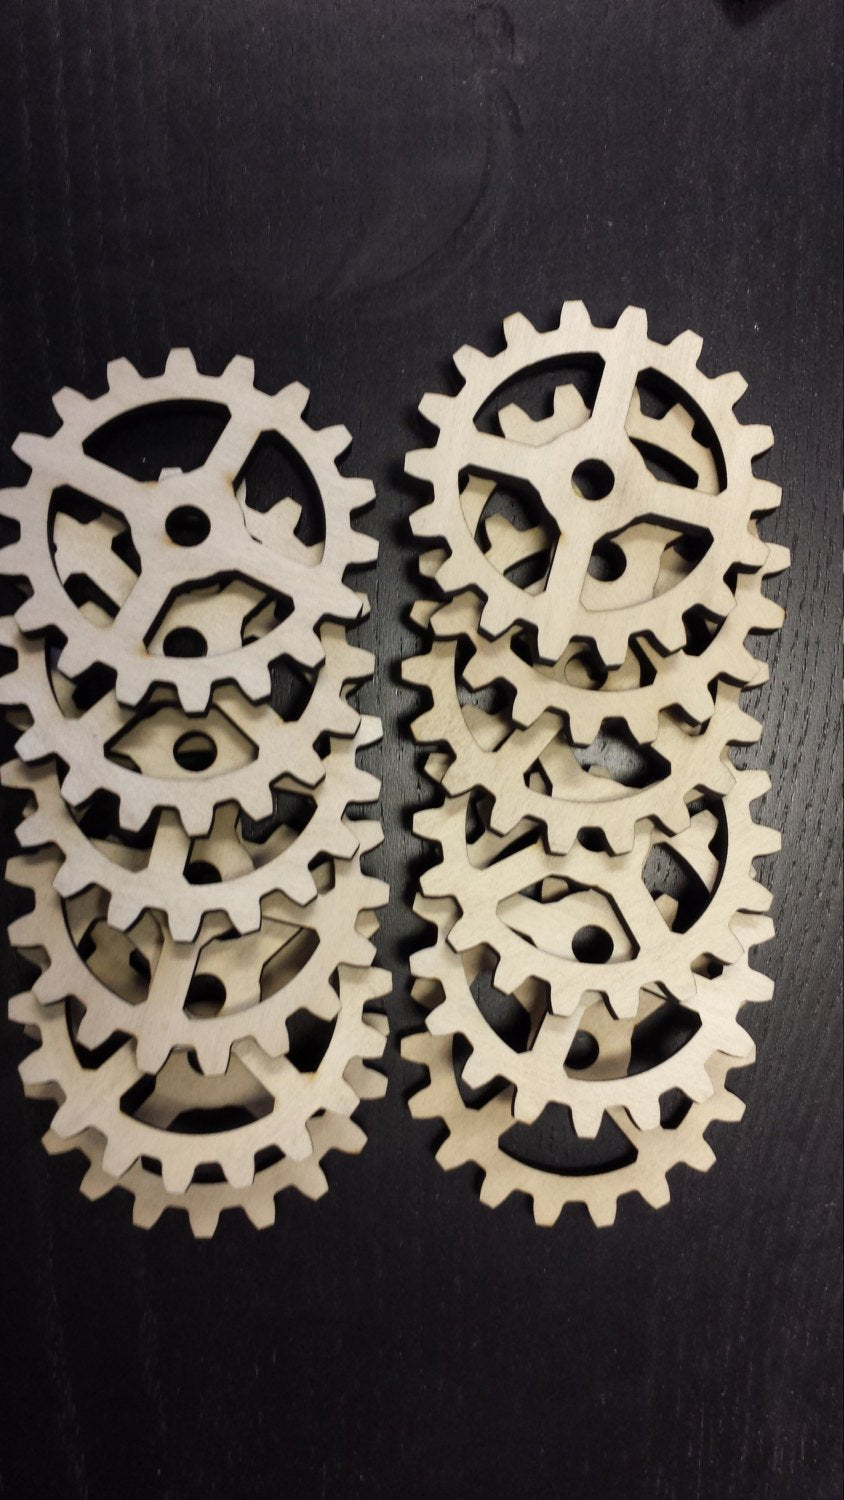 Wooden Gears for Steampunk